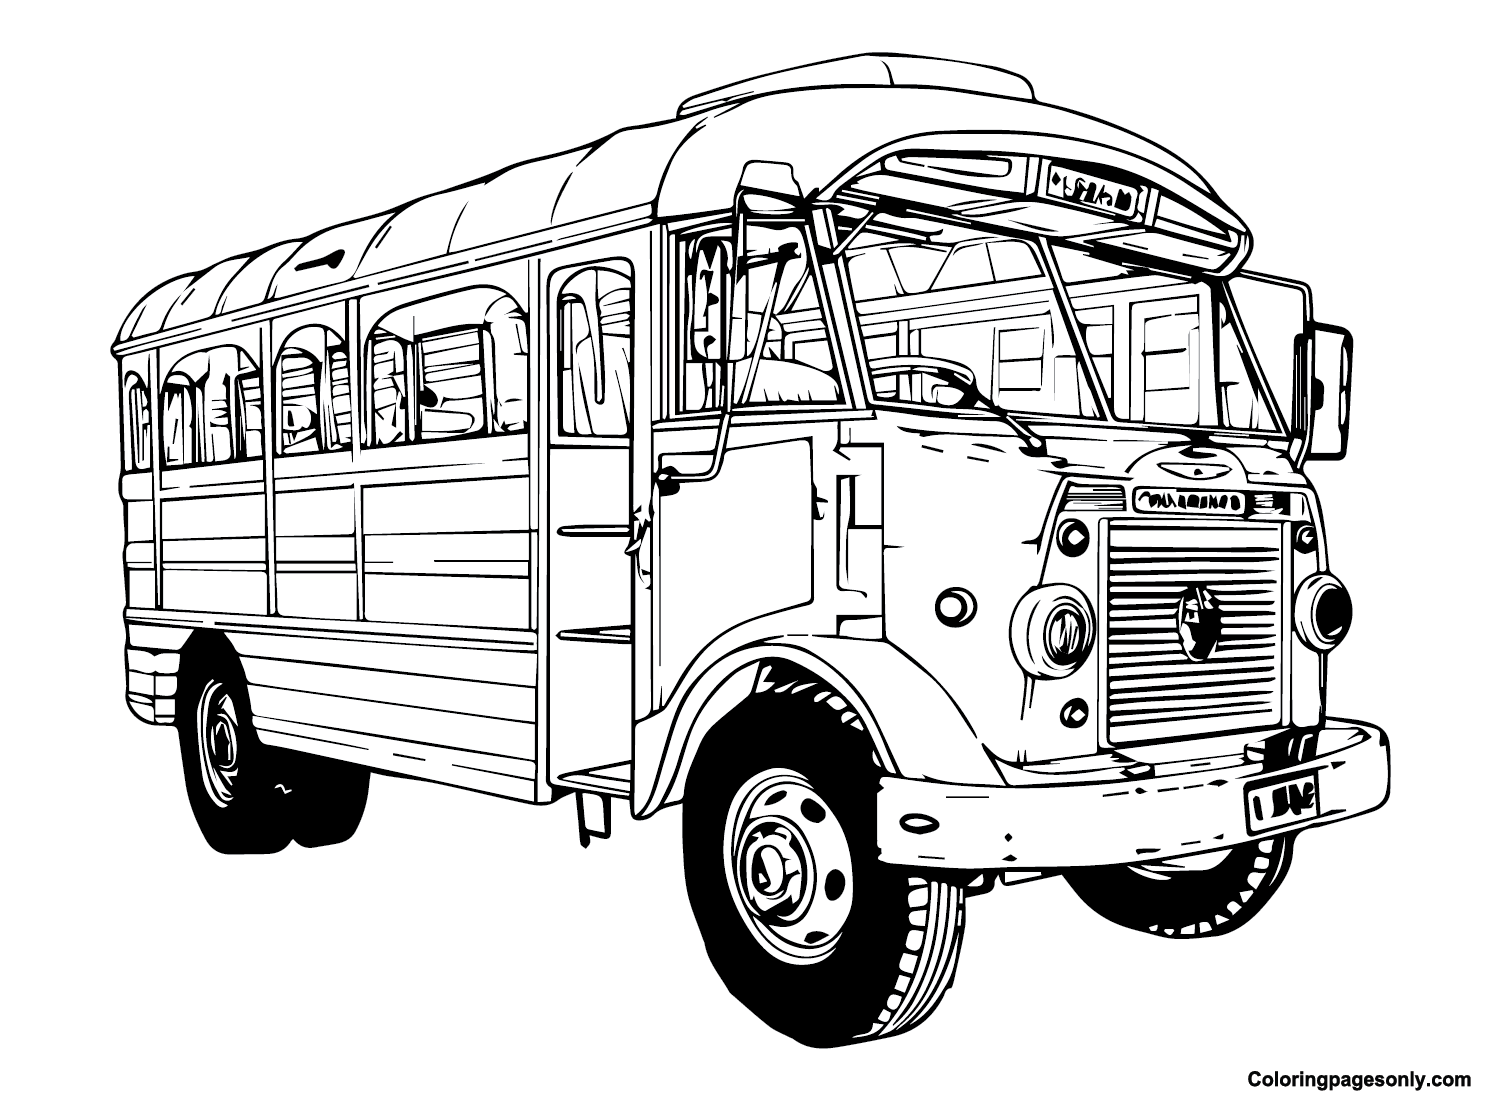 Jeepney Images Free Coloring Pages